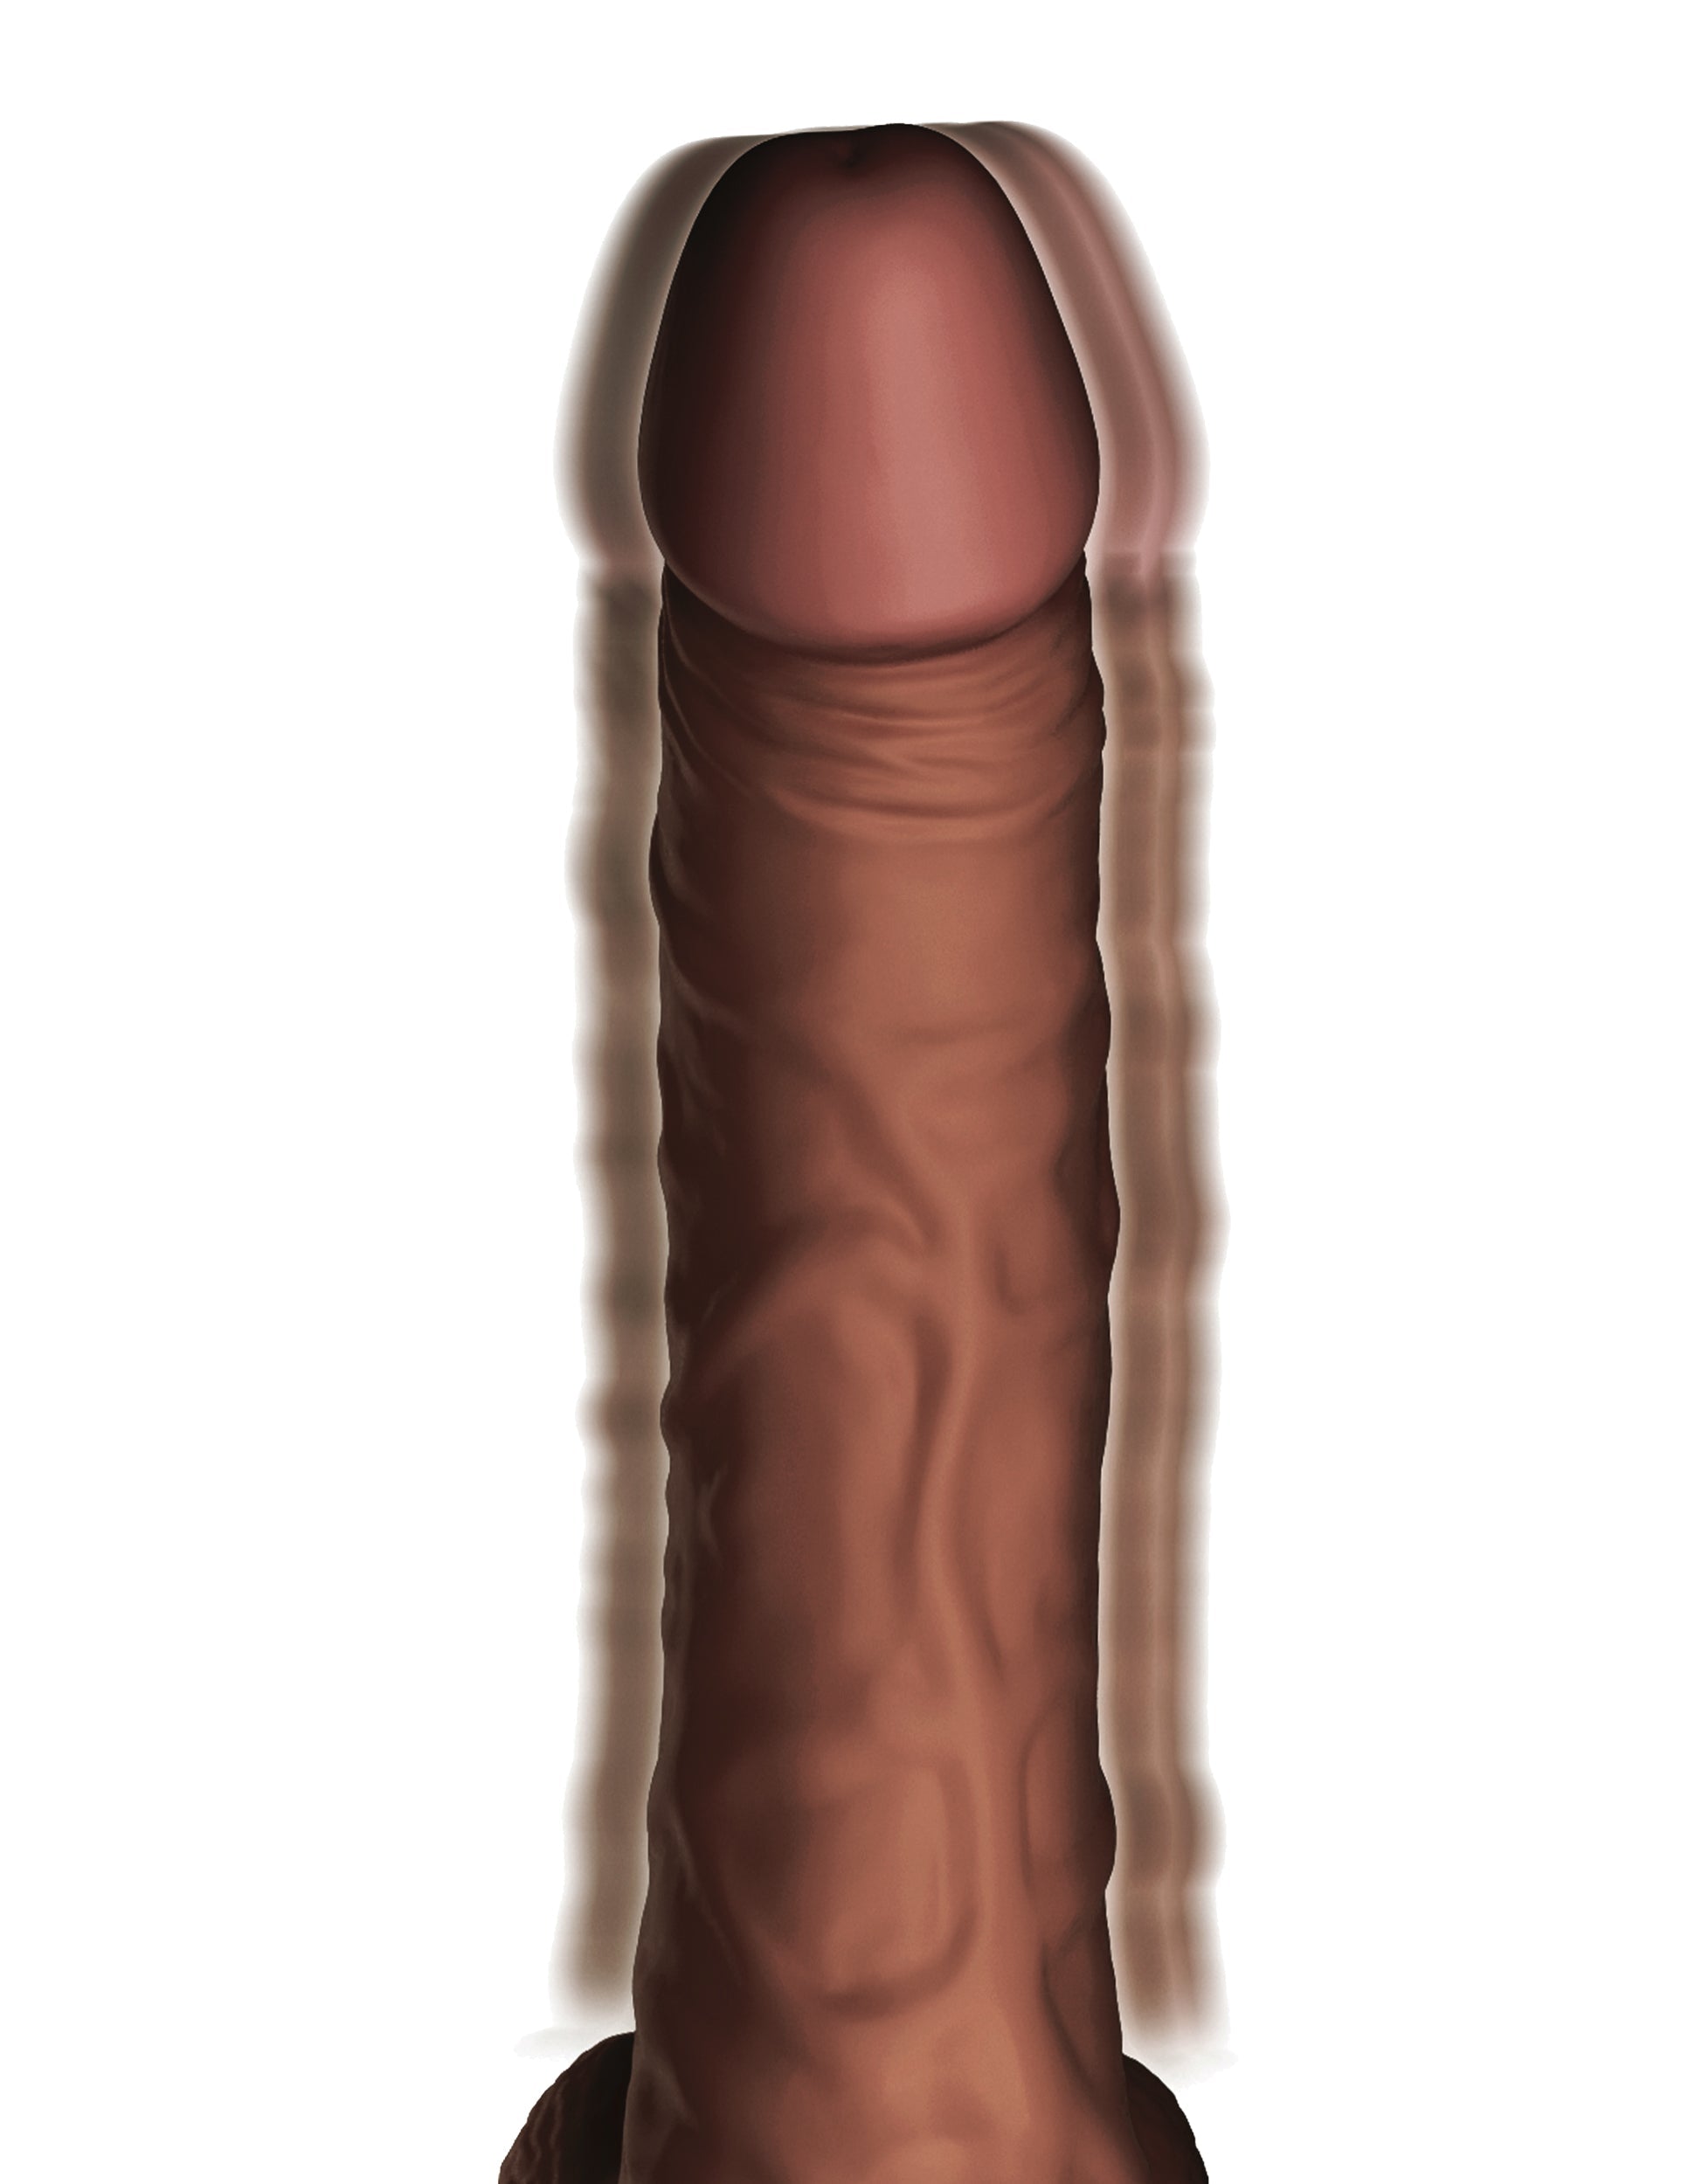 King Cock Plus Rechargeable Thrusting Dildo and LIBERATOR Plum Wanda Toy Mount